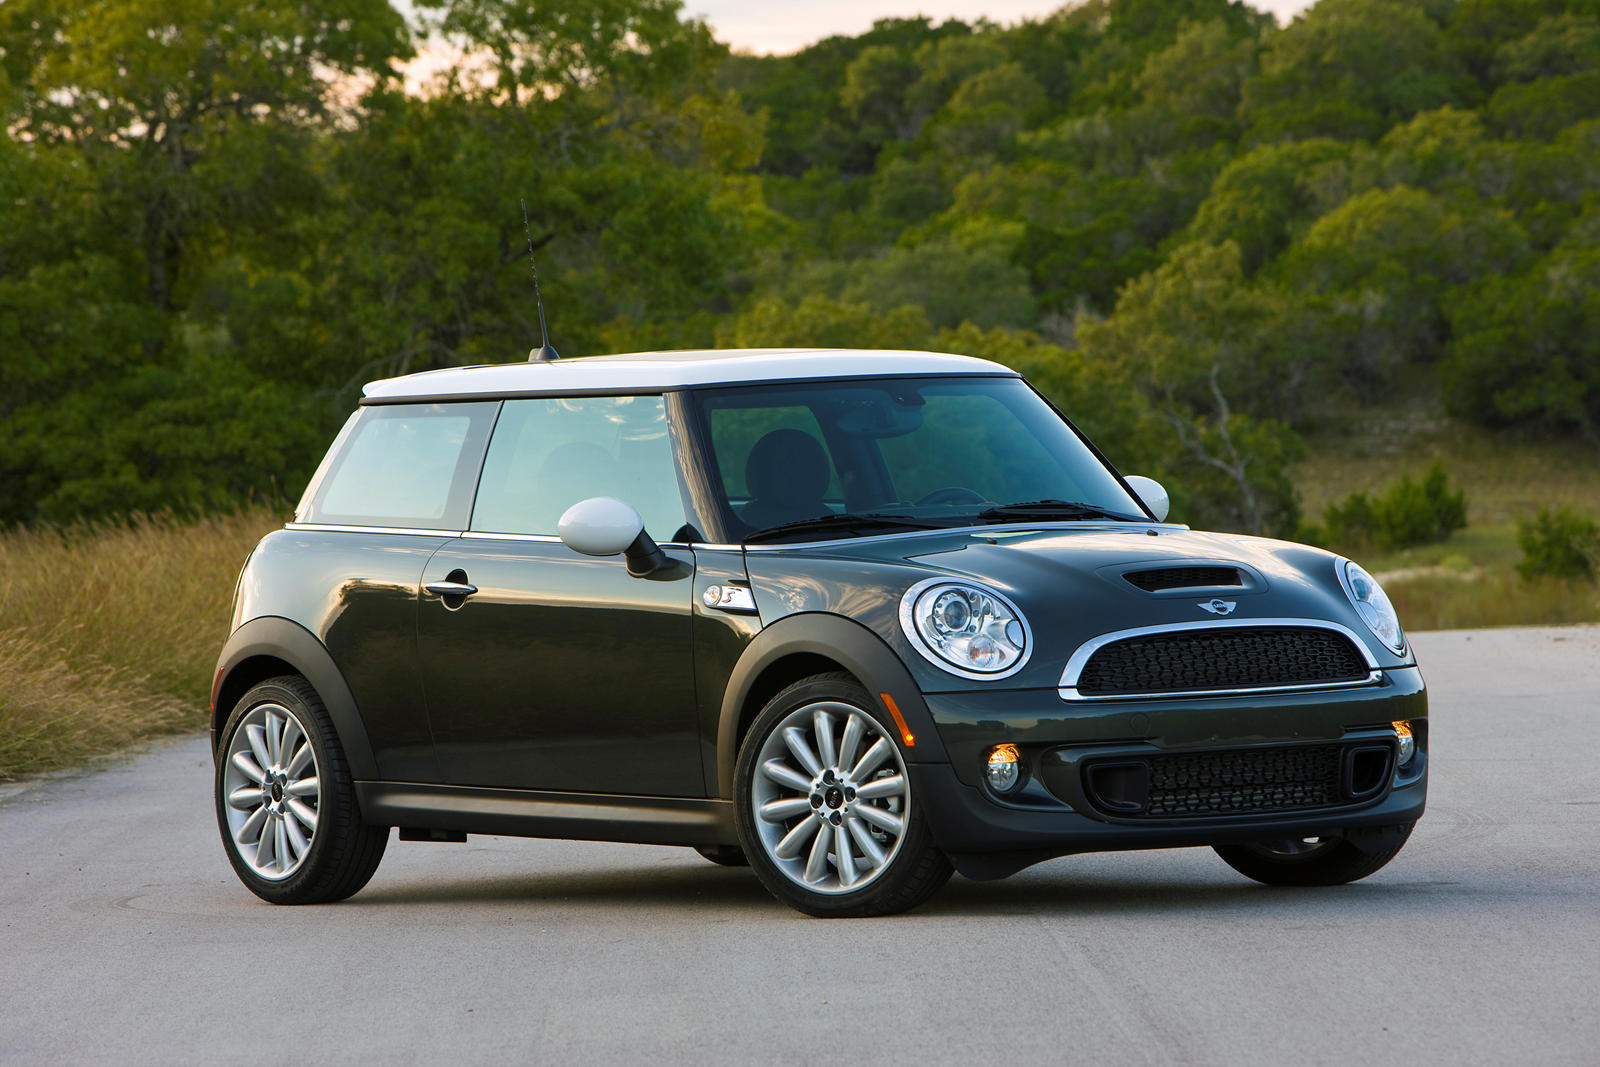 2011 MINI Cooper S : Latest Prices, Reviews, Specs, Photos and